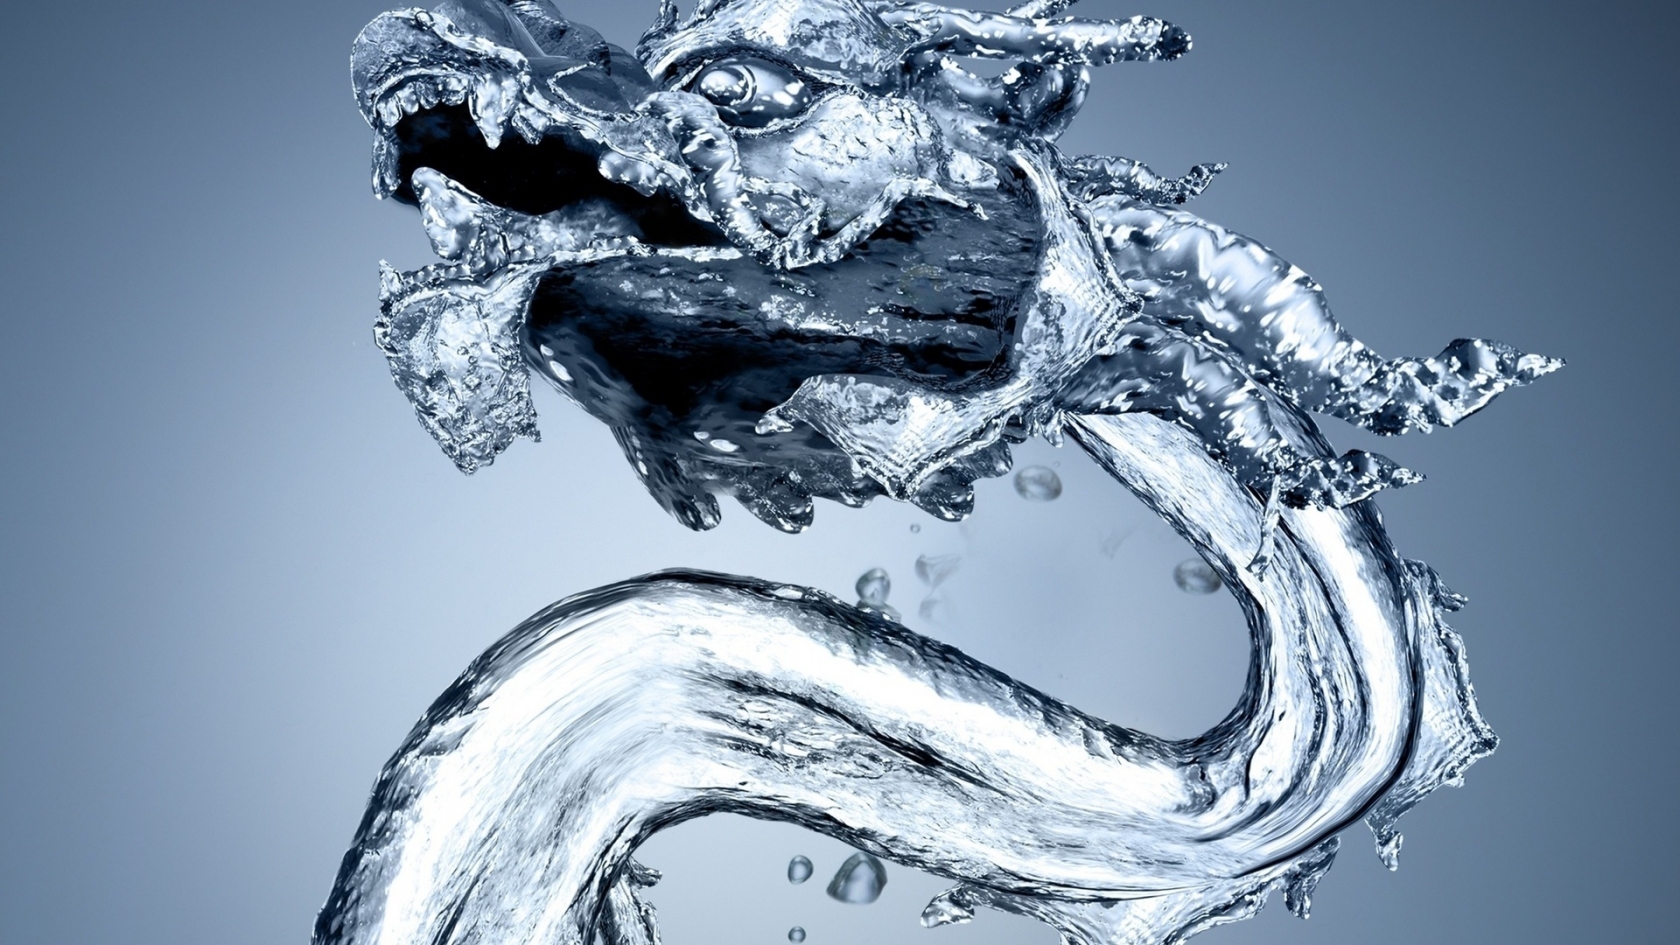 Water Dragon for 1680 x 945 HDTV resolution